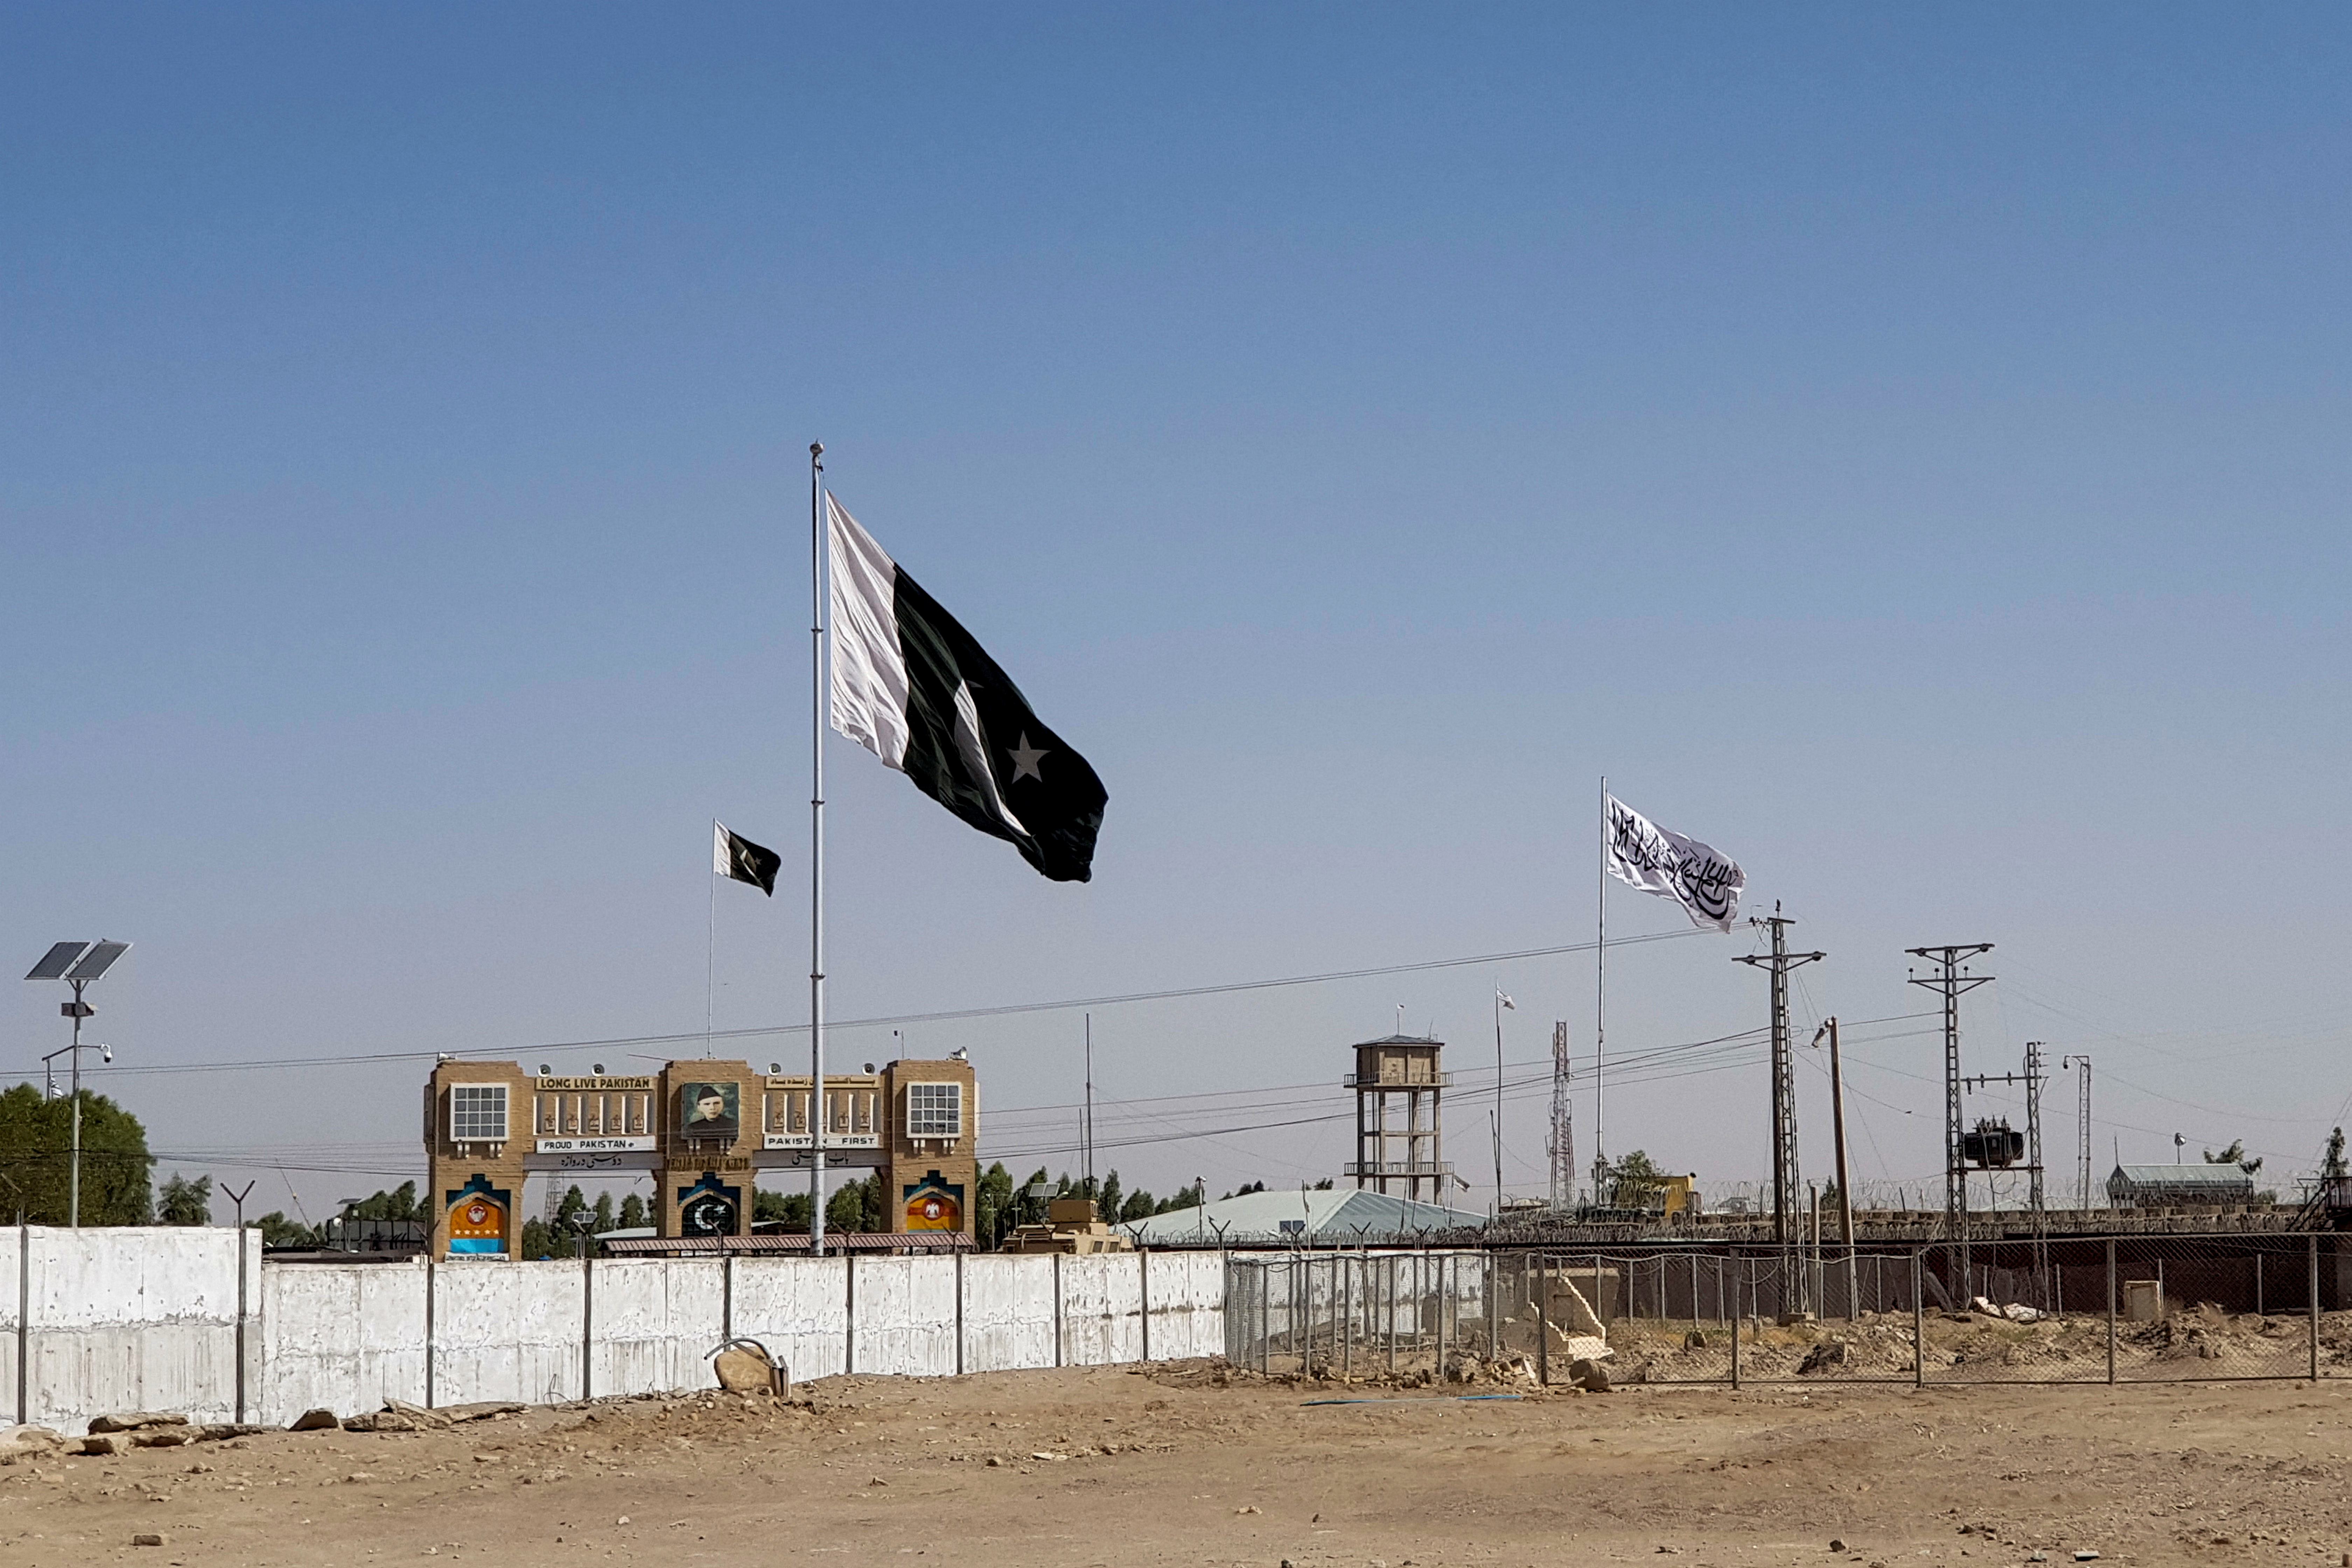 General view of the Pakistan's flag and the Taliban's flag in the background as seen from the Friendship Gate crossing point in the Pakistan-Afghanistan border town of Chaman